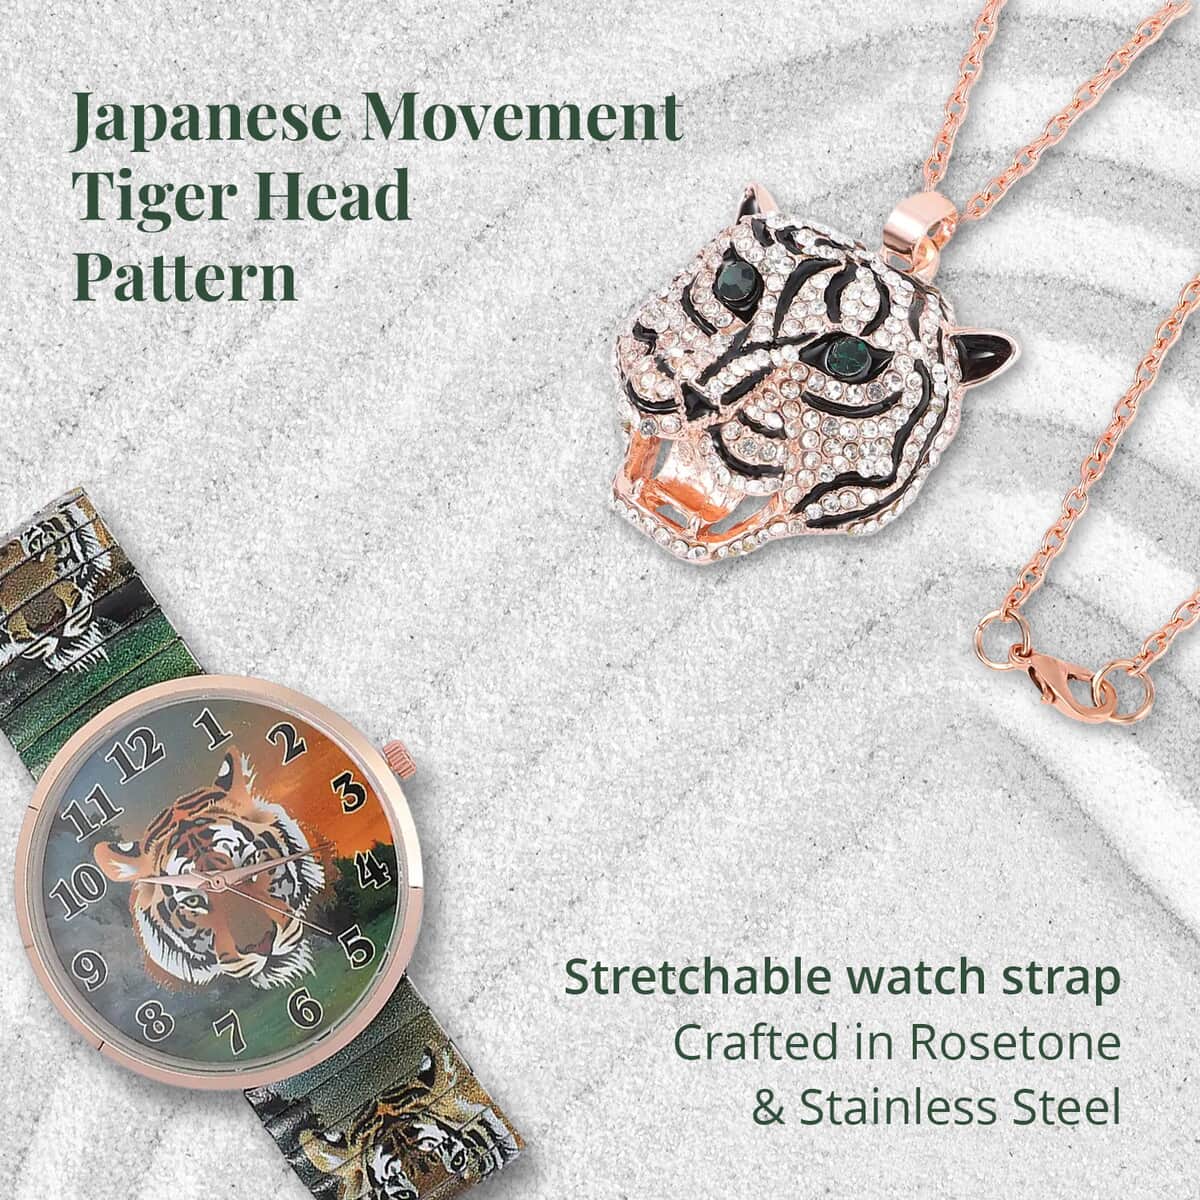 STRADA Green & White Austrian Crystal, Enameled Japanese Movement Tiger Head Pattern Stretch Watch in Stainless Steel and Tiger Head Pendant Necklace (24 Inches) in Rosetone image number 3